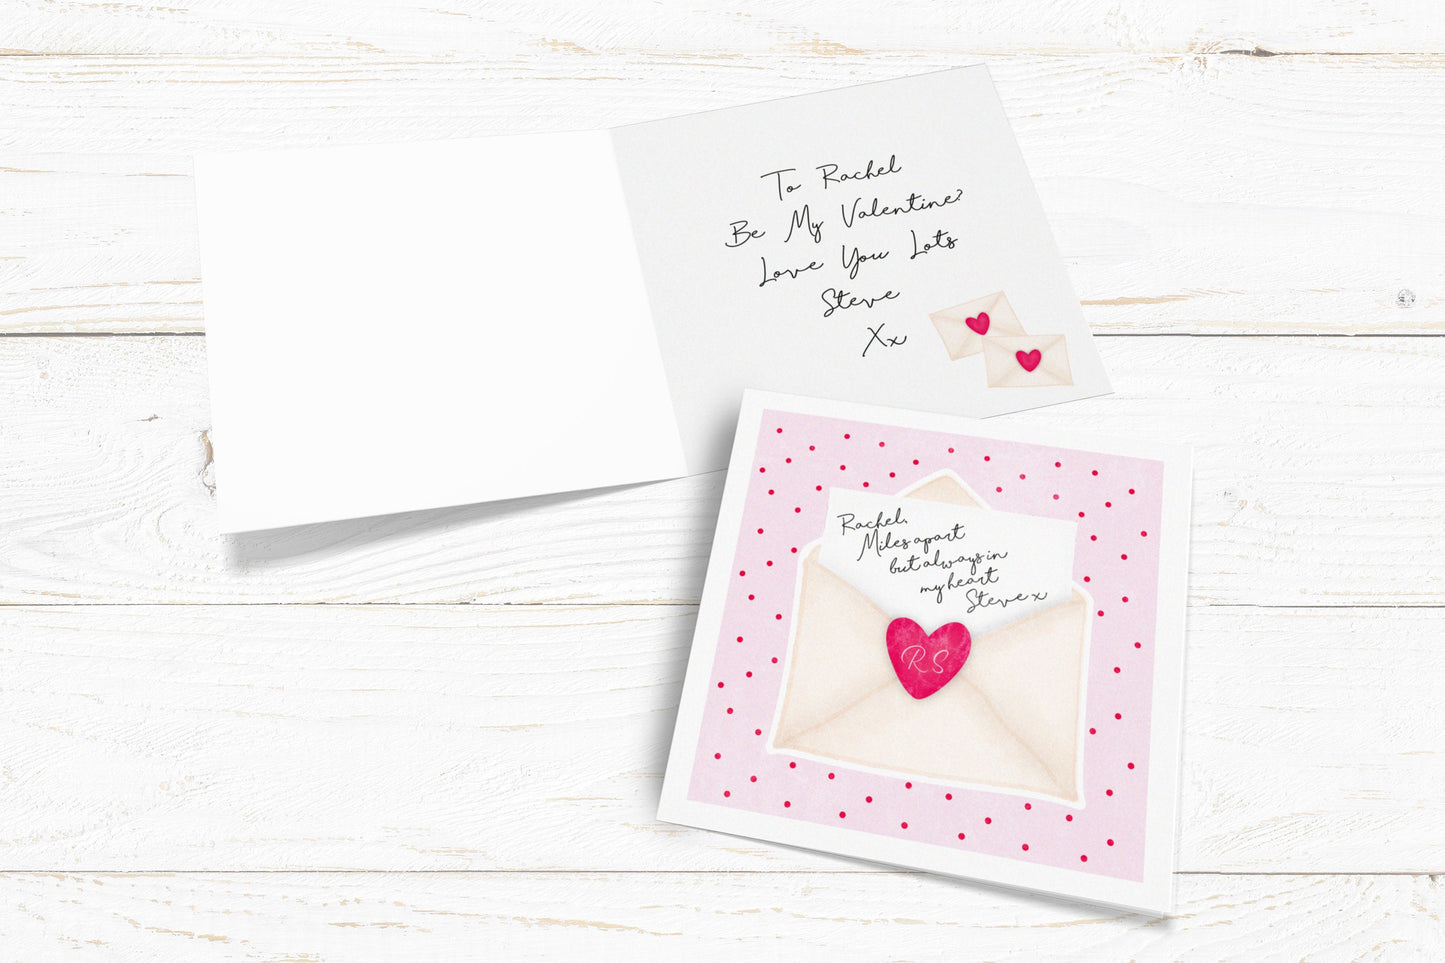 Miles apart but always in my heart Personalised Card. Valentine's Card. Cute Love Card. Personalised Valentines Card. Send Direct Option.